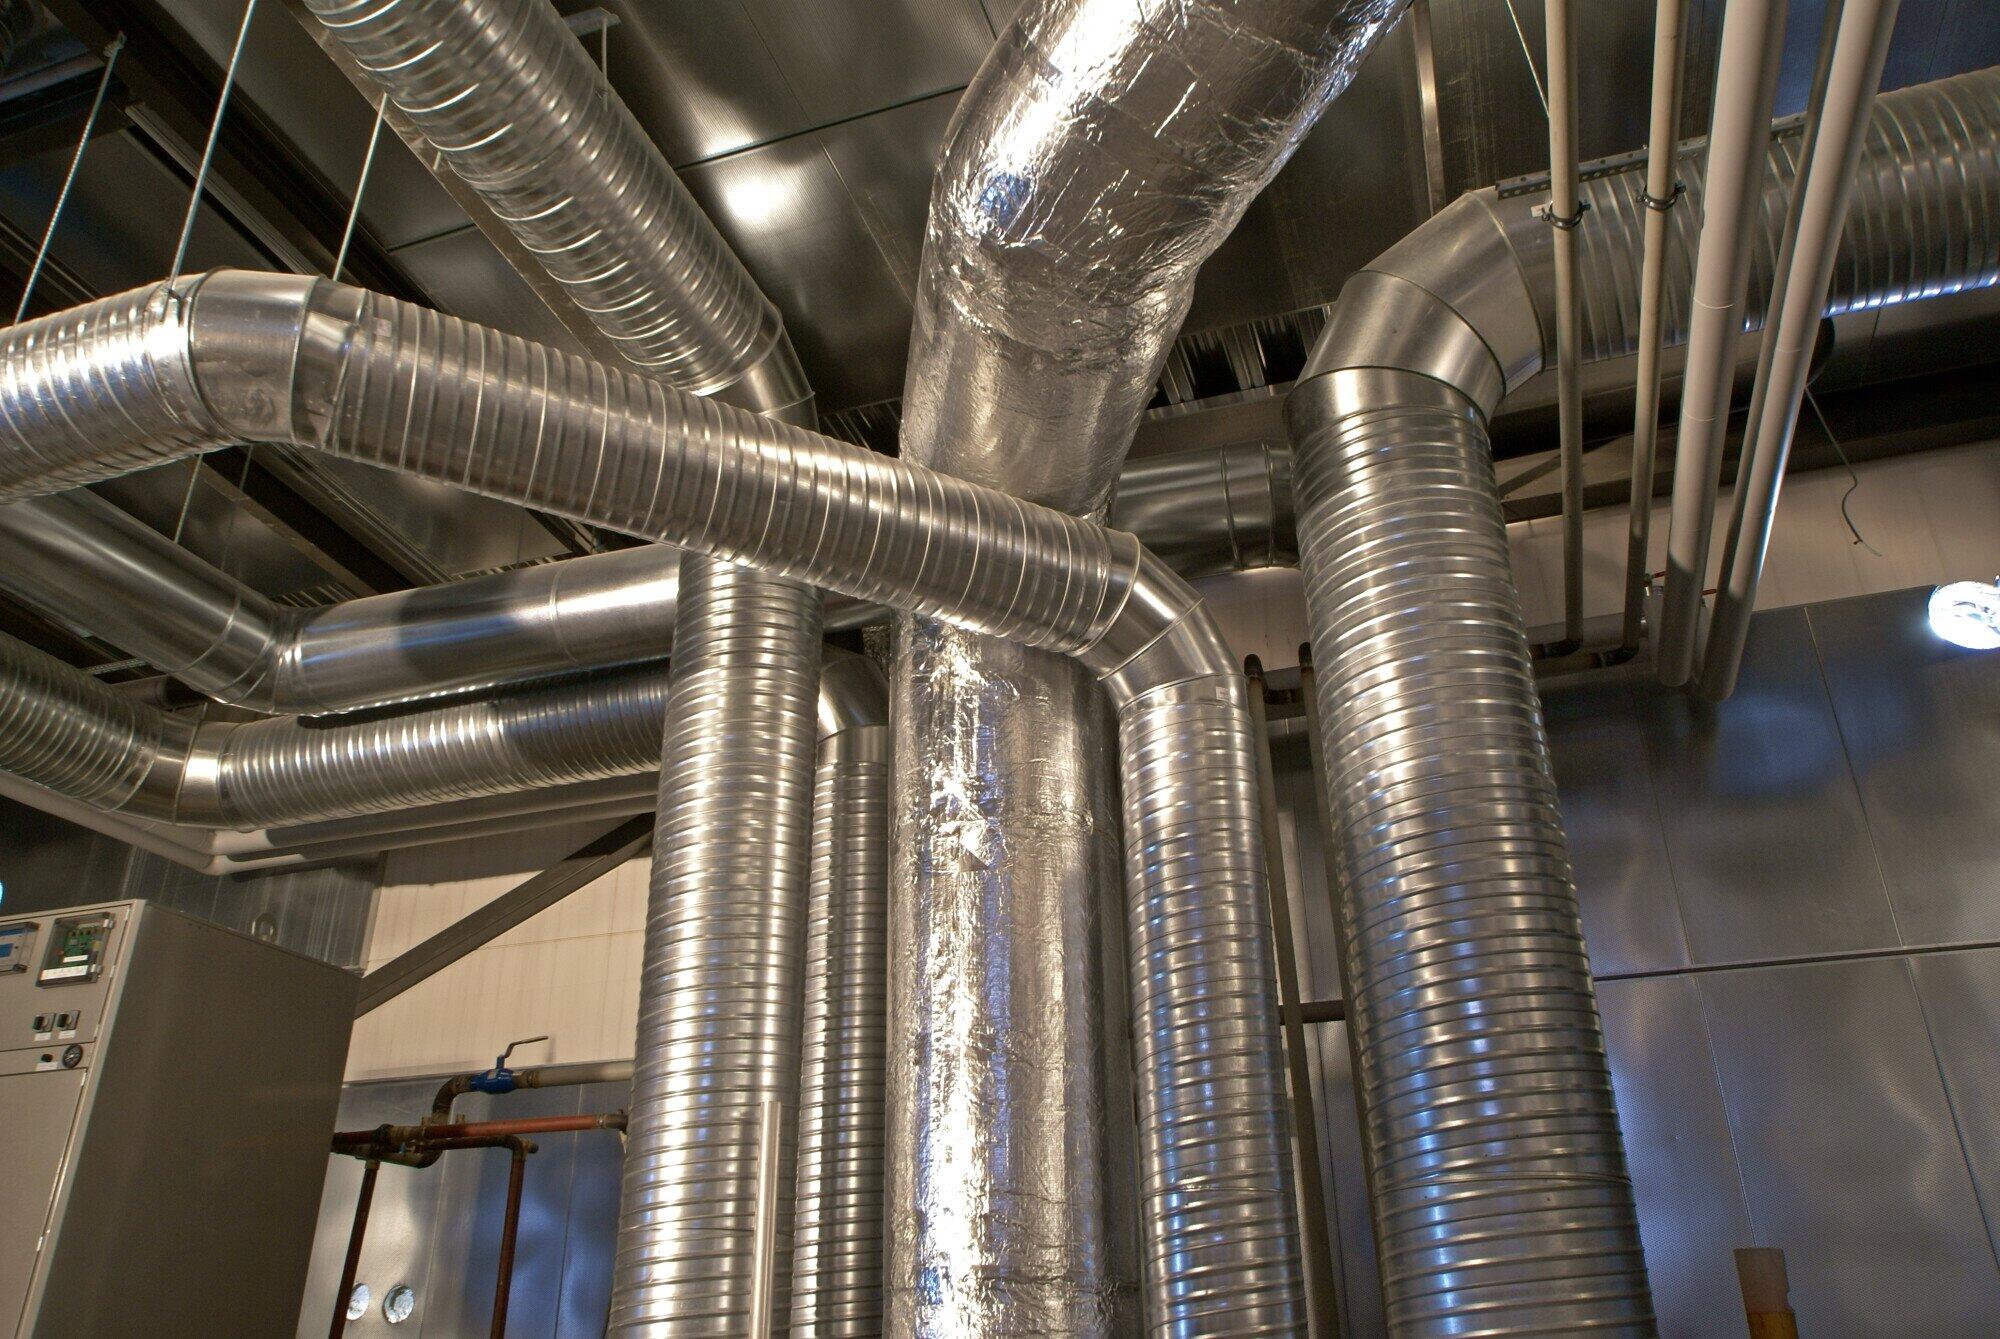 leaky air ducts